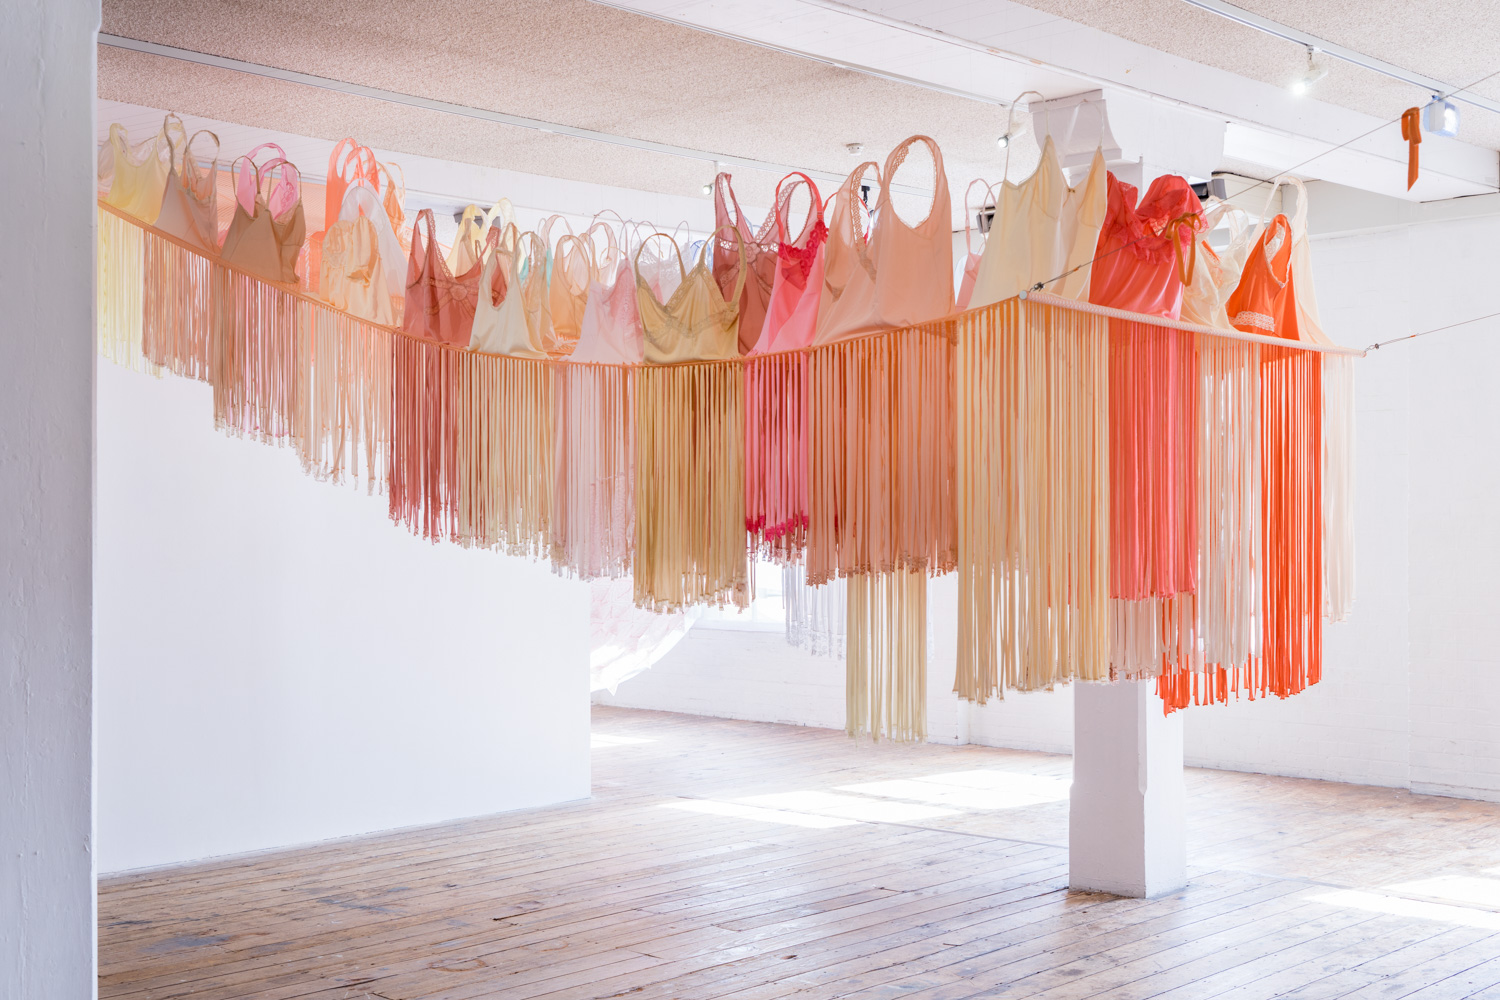   The Sleepover , 2018, found nighties and slips, found synthetic fabric and cotton ribbon, milliner’s wire, thread (with assistance from Melanie Ward, Monika Holgar and Kate Woodcroft) 670cm x 280cm x 210cm.   You are welcome to gently touch and wal